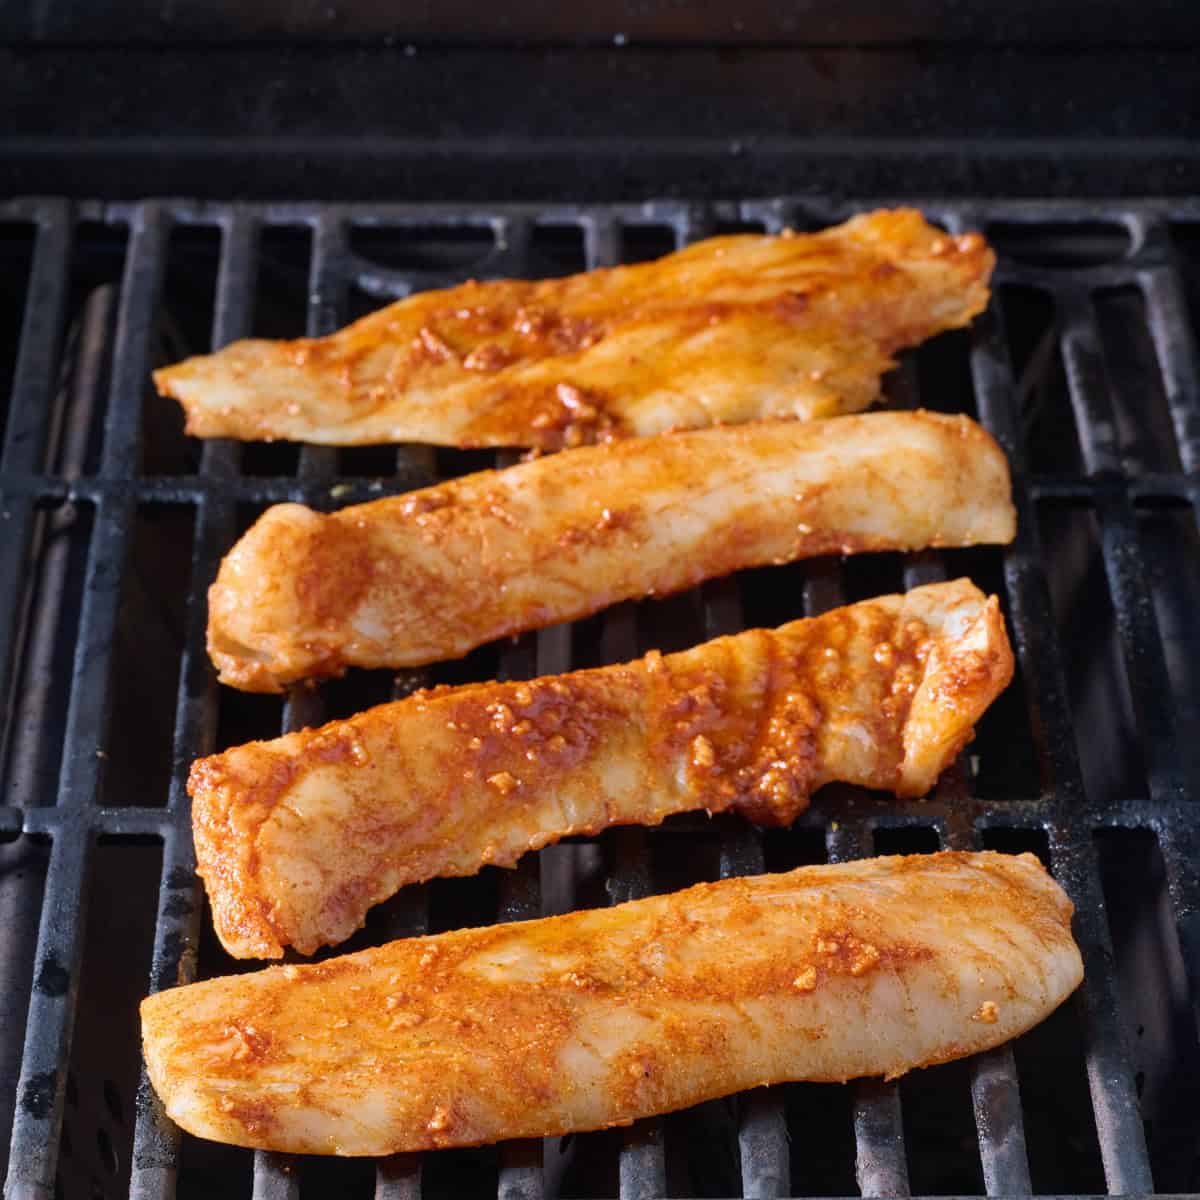 Fish fillets on a gas grill.